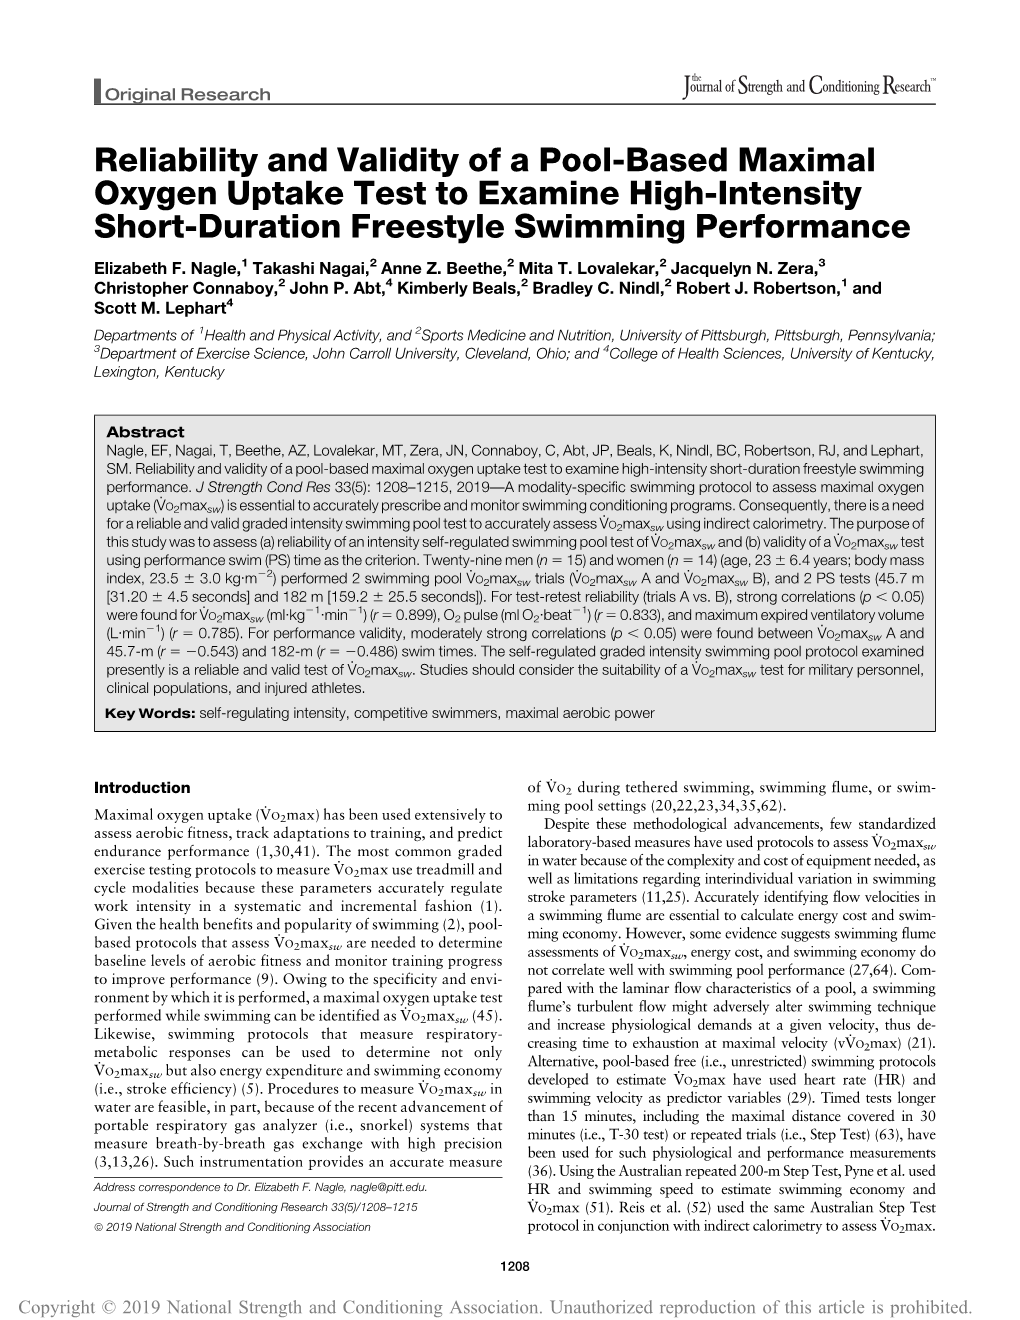 Reliability and Validity of a Pool-Based Maximal Oxygen Uptake Test to Examine High-Intensity Short-Duration Freestyle Swimming Performance